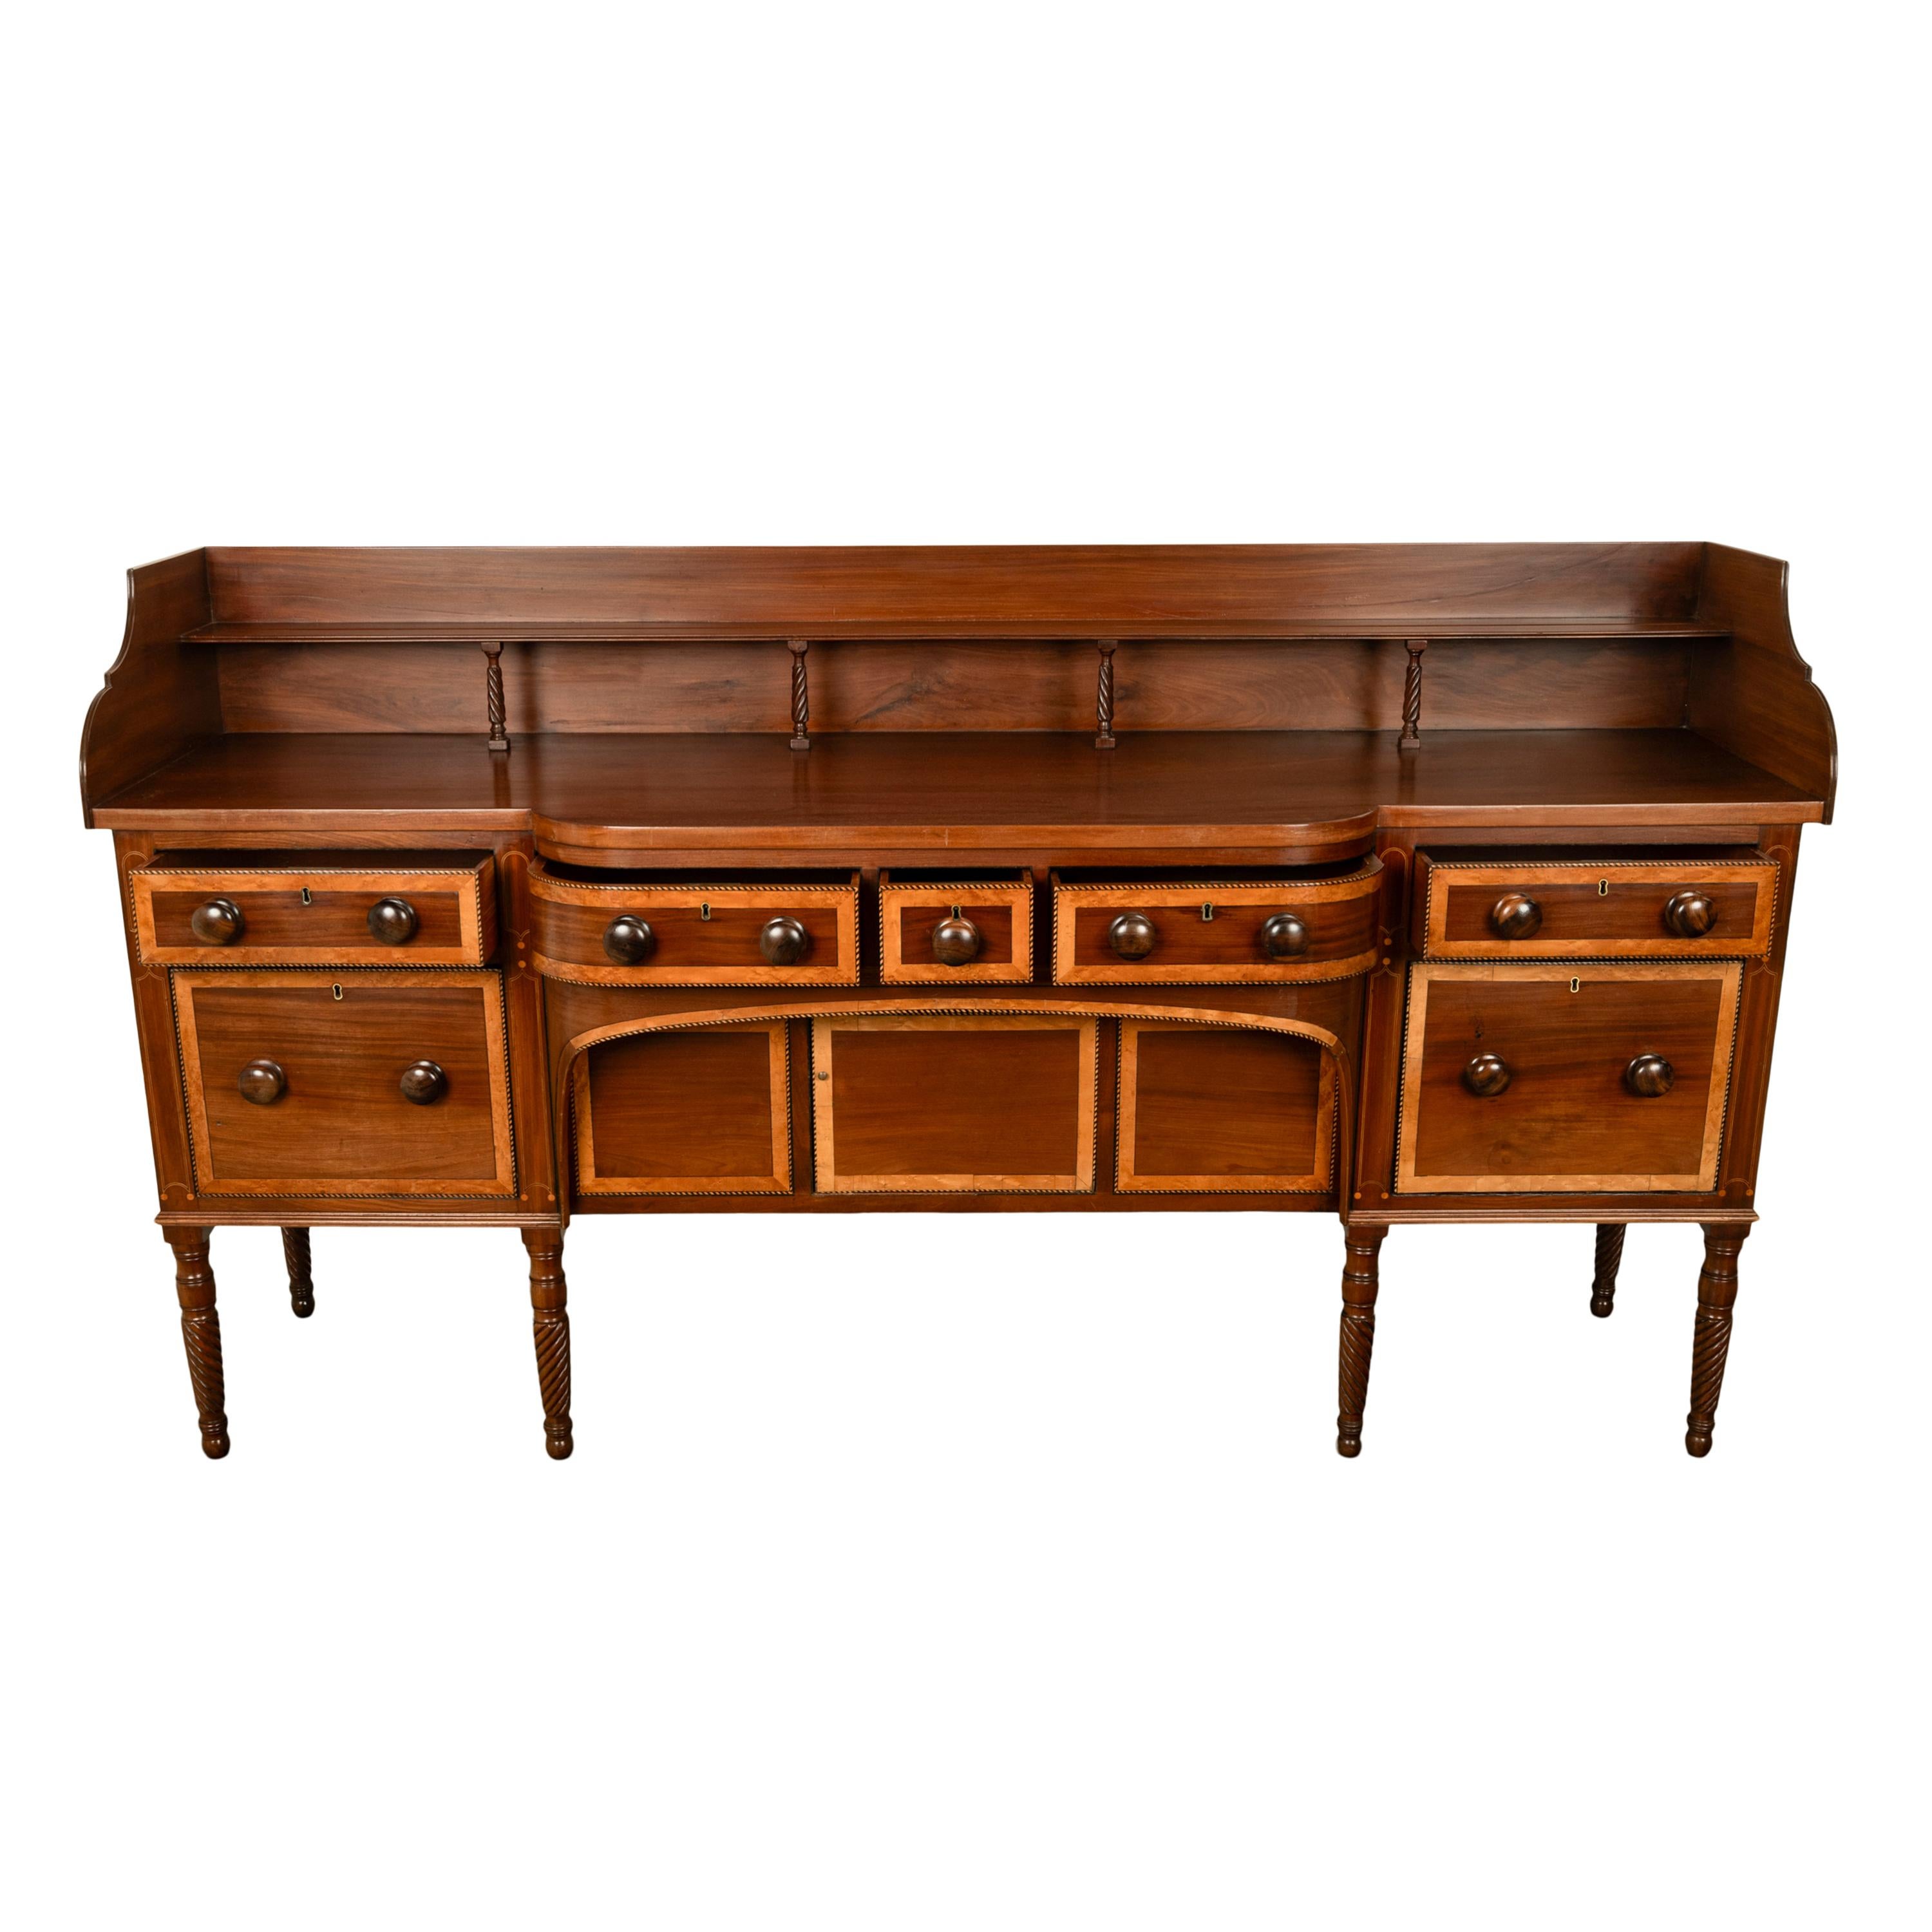 Antique Georgian Irish Inlaid Cuban Mahogany Country House Sideboard Donegal For Sale 5